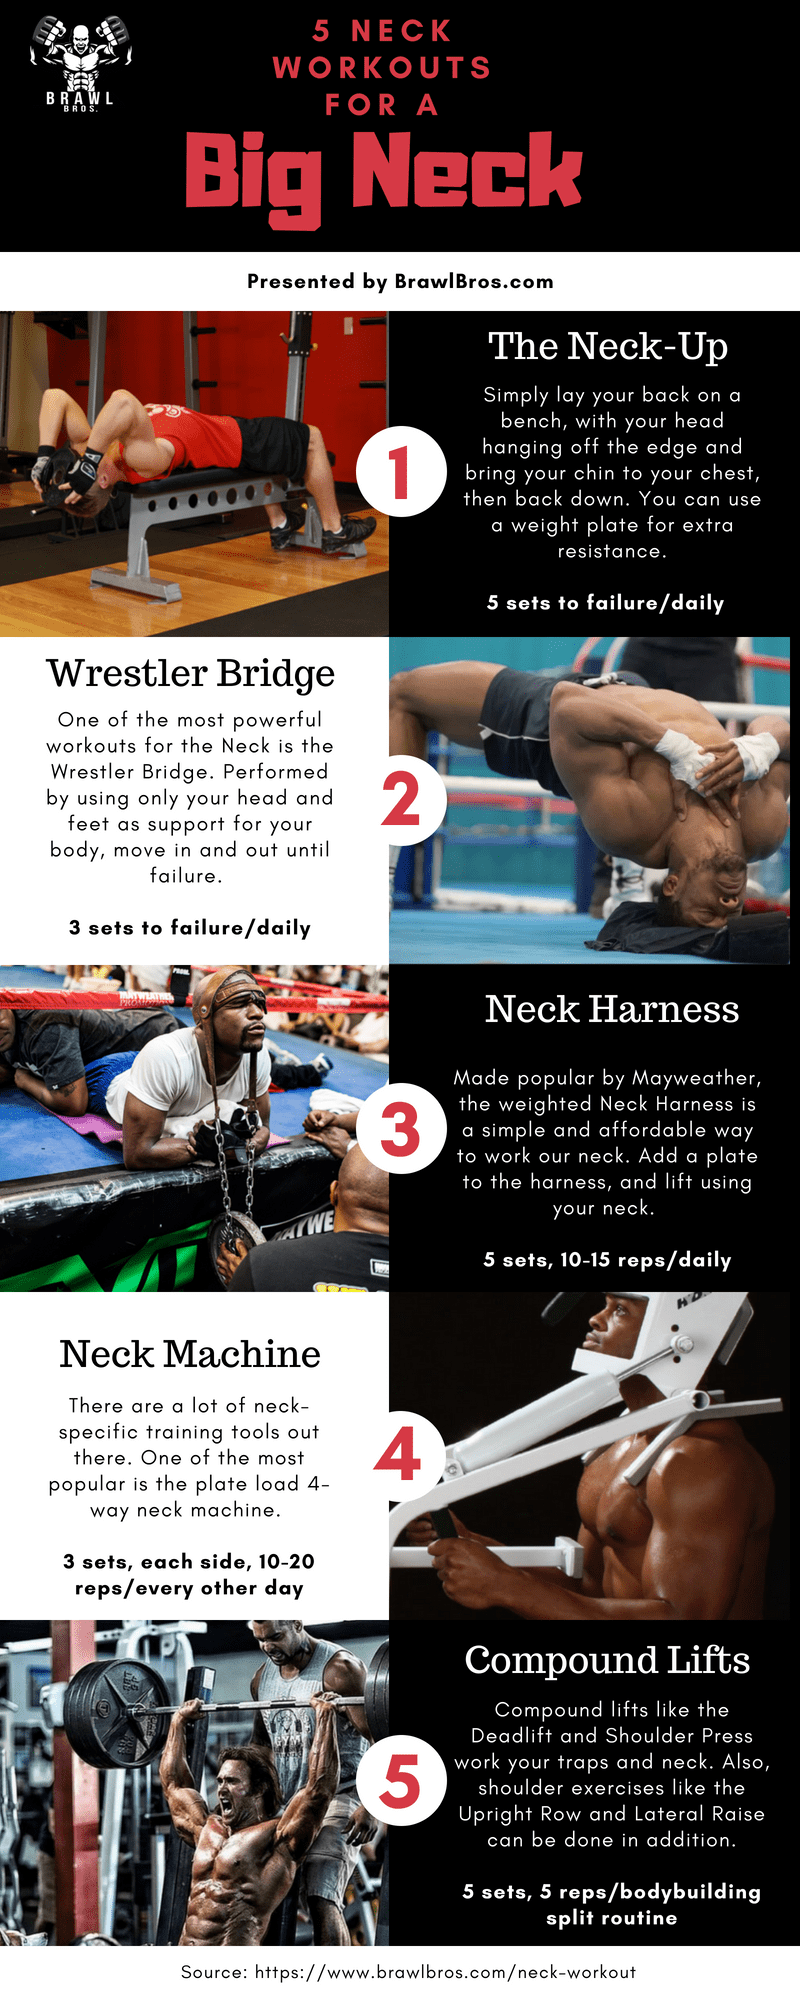 https://www.brawlbros.com/wp-content/uploads/2018/06/Neck-Workout-Infographic-2-1.png